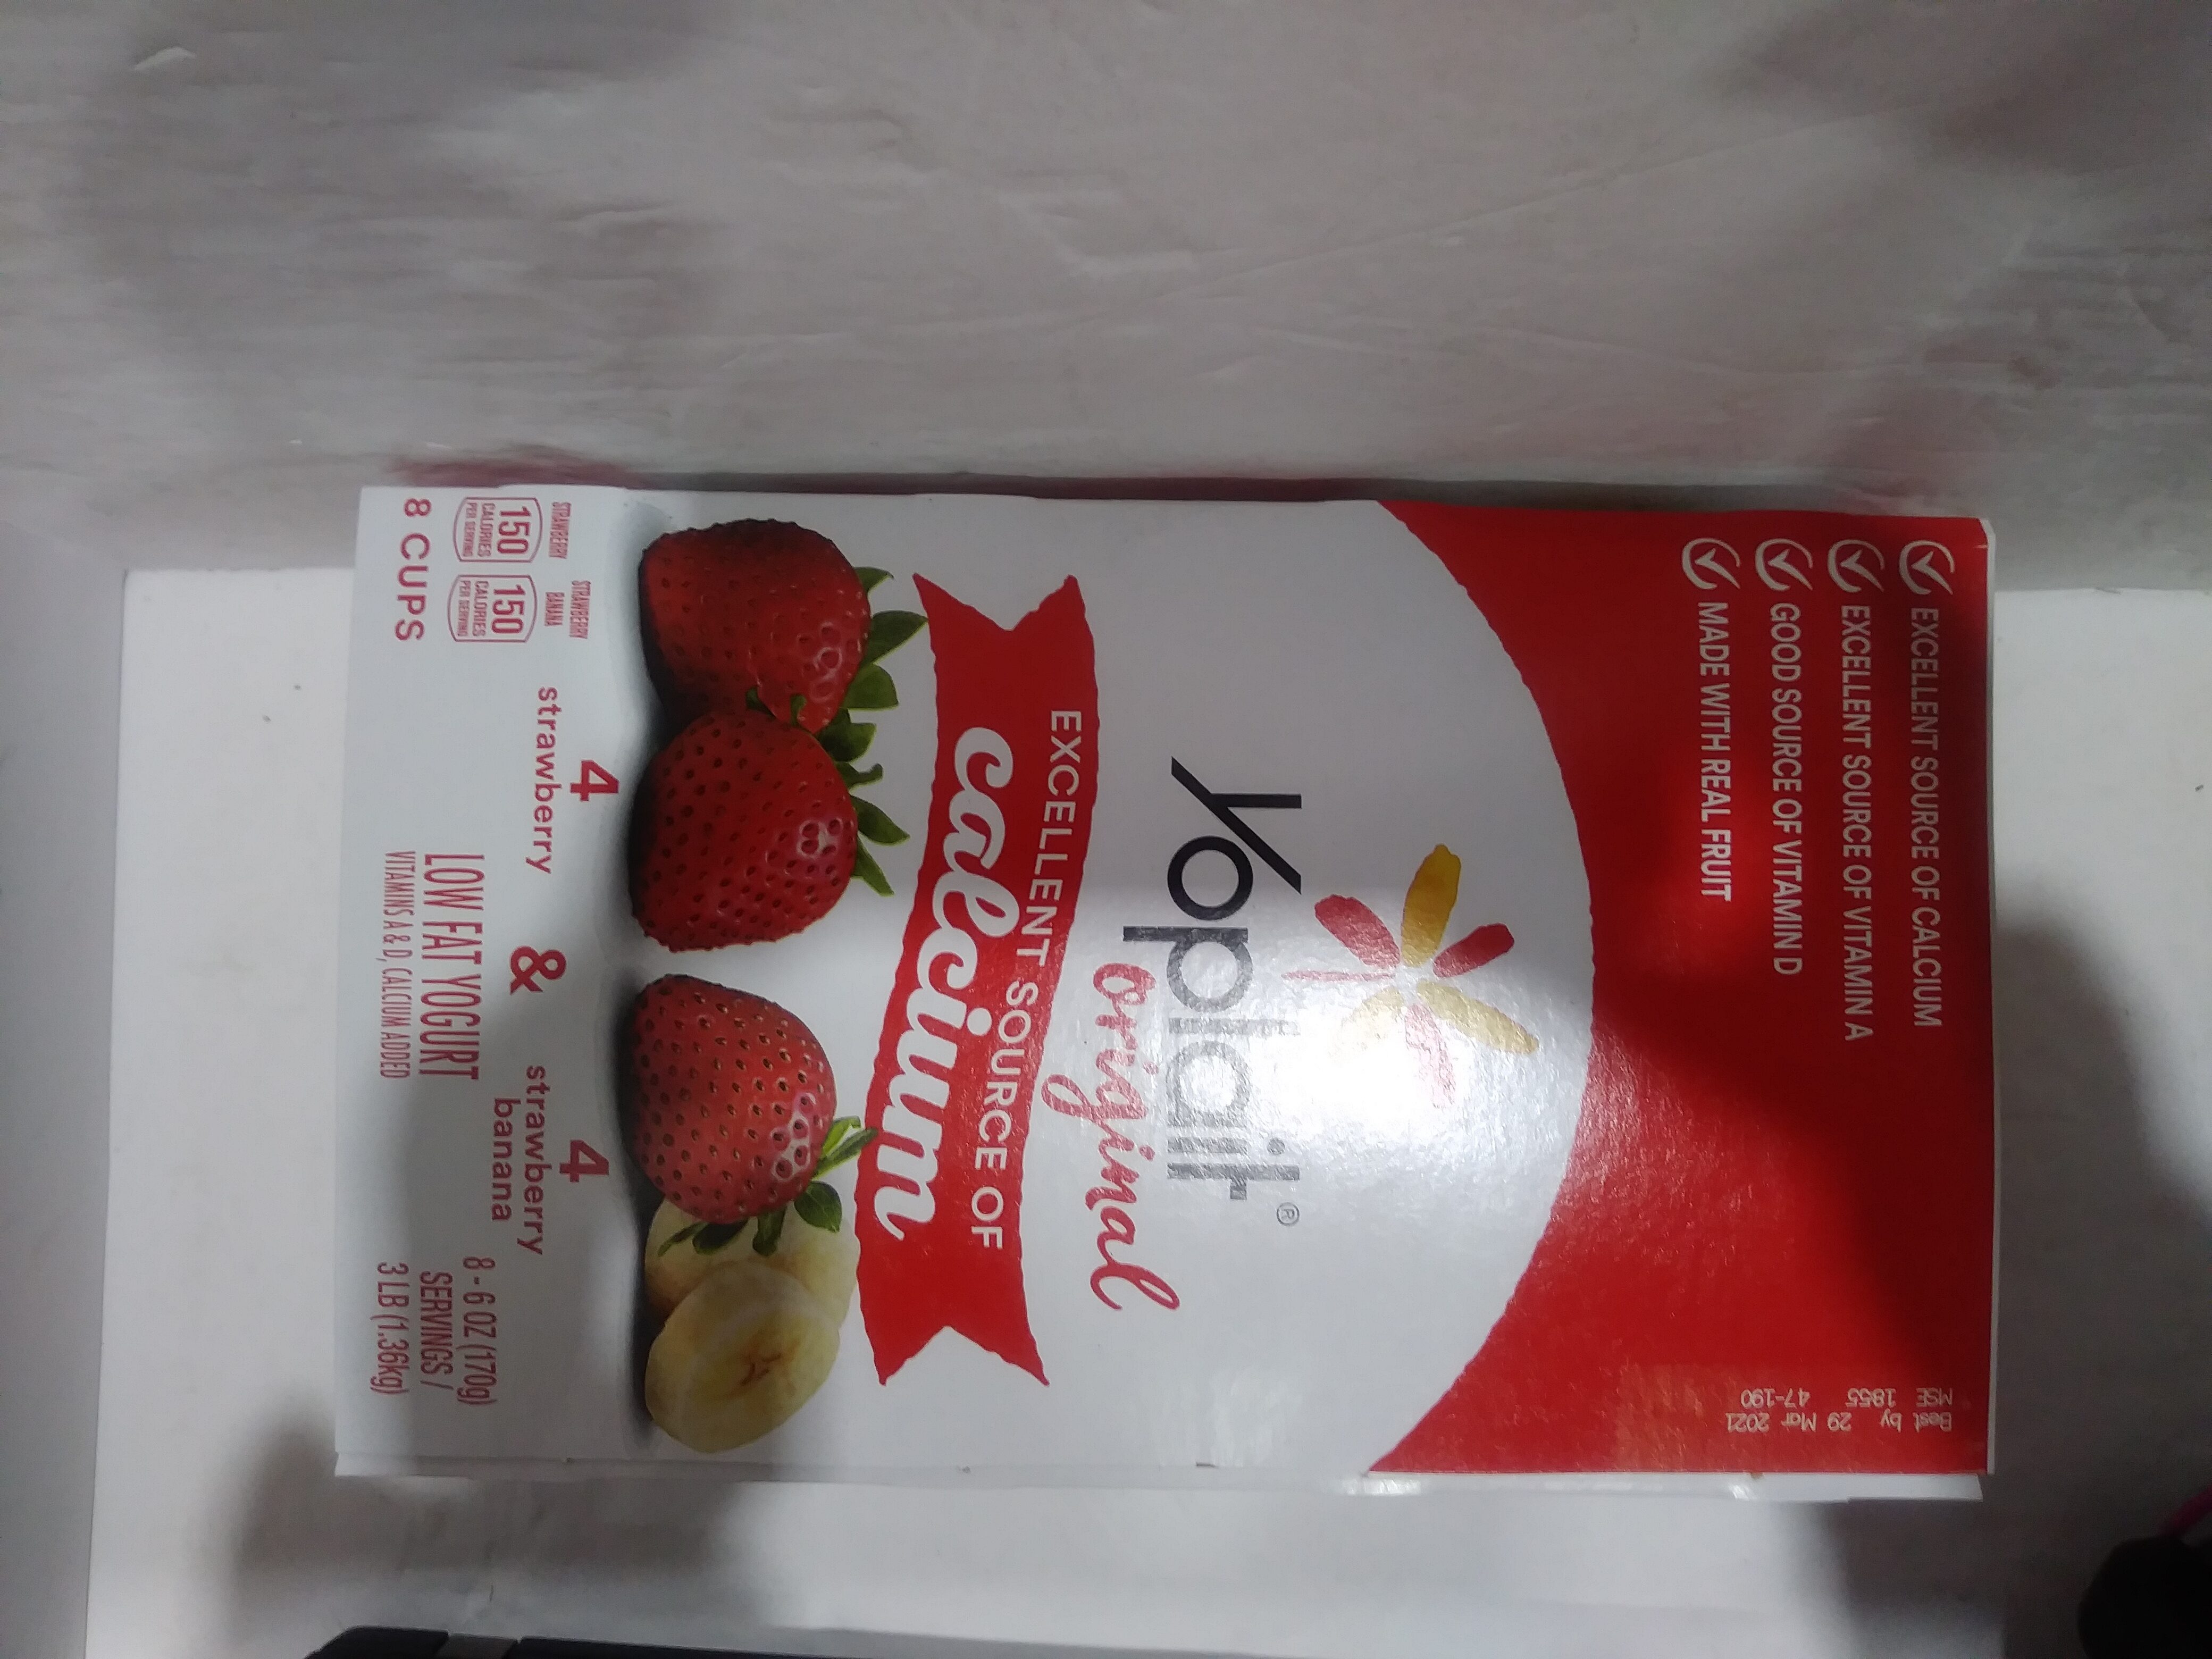 Original Variety Pack Strawberry/Strawberry Banana Yogurt - Recycling instructions and/or packaging information